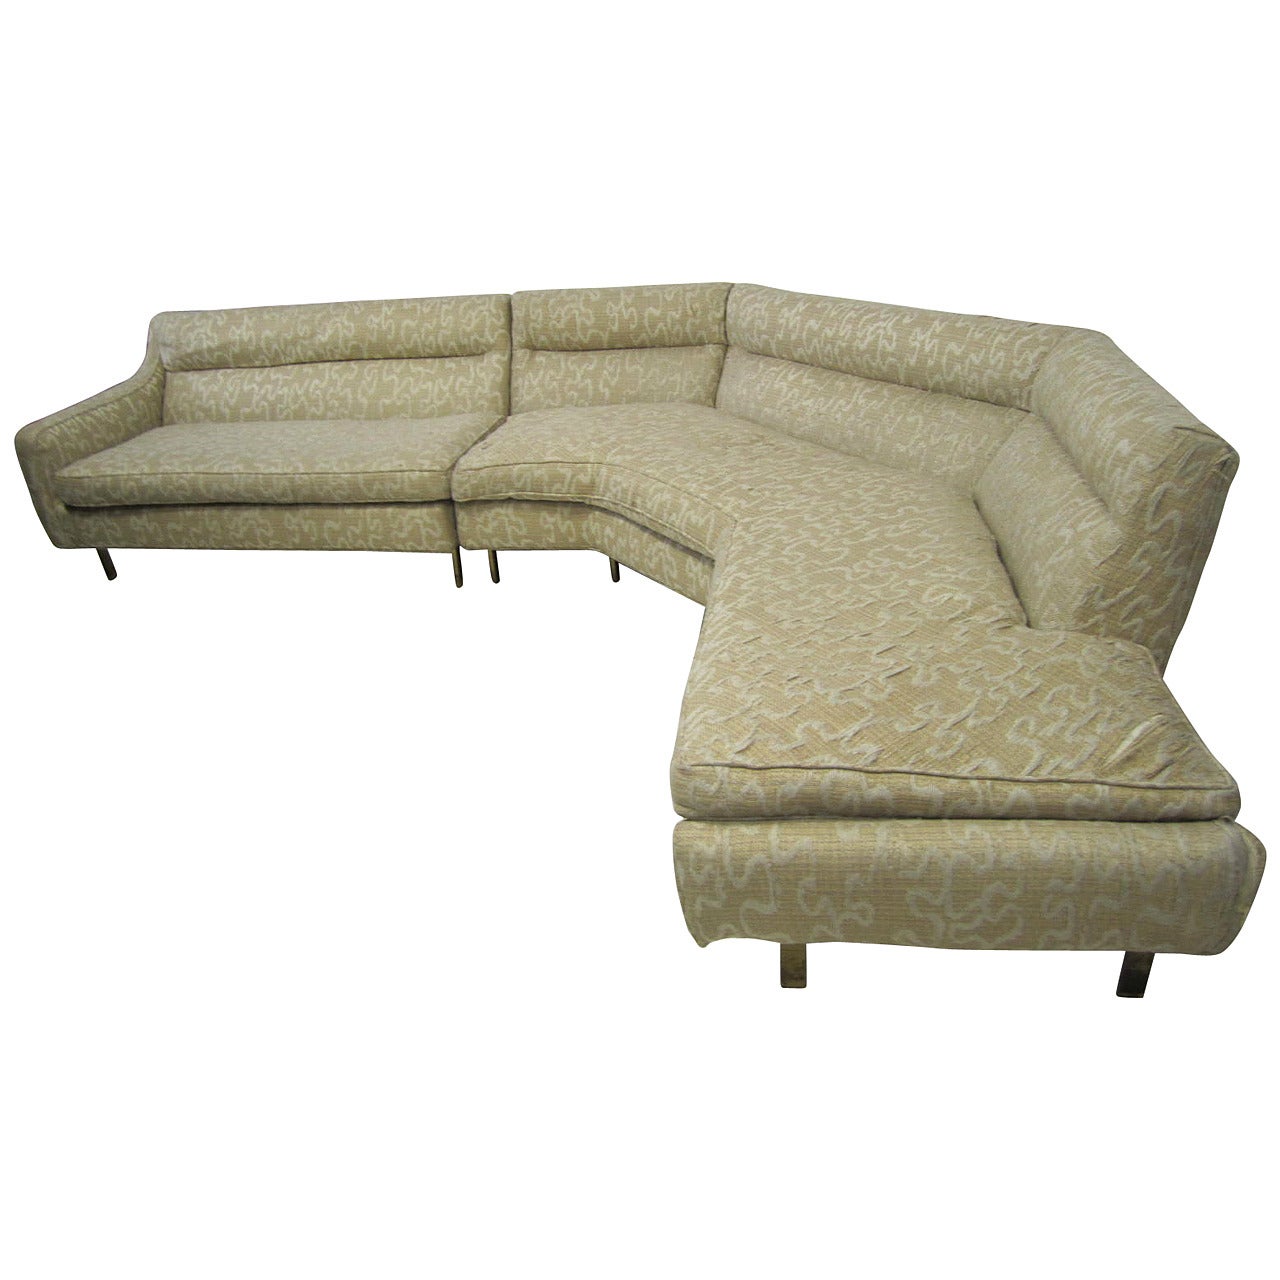 Stunning Harvey Probber Style Two-Piece Sectional Sofa with Solid Bronze Legs For Sale